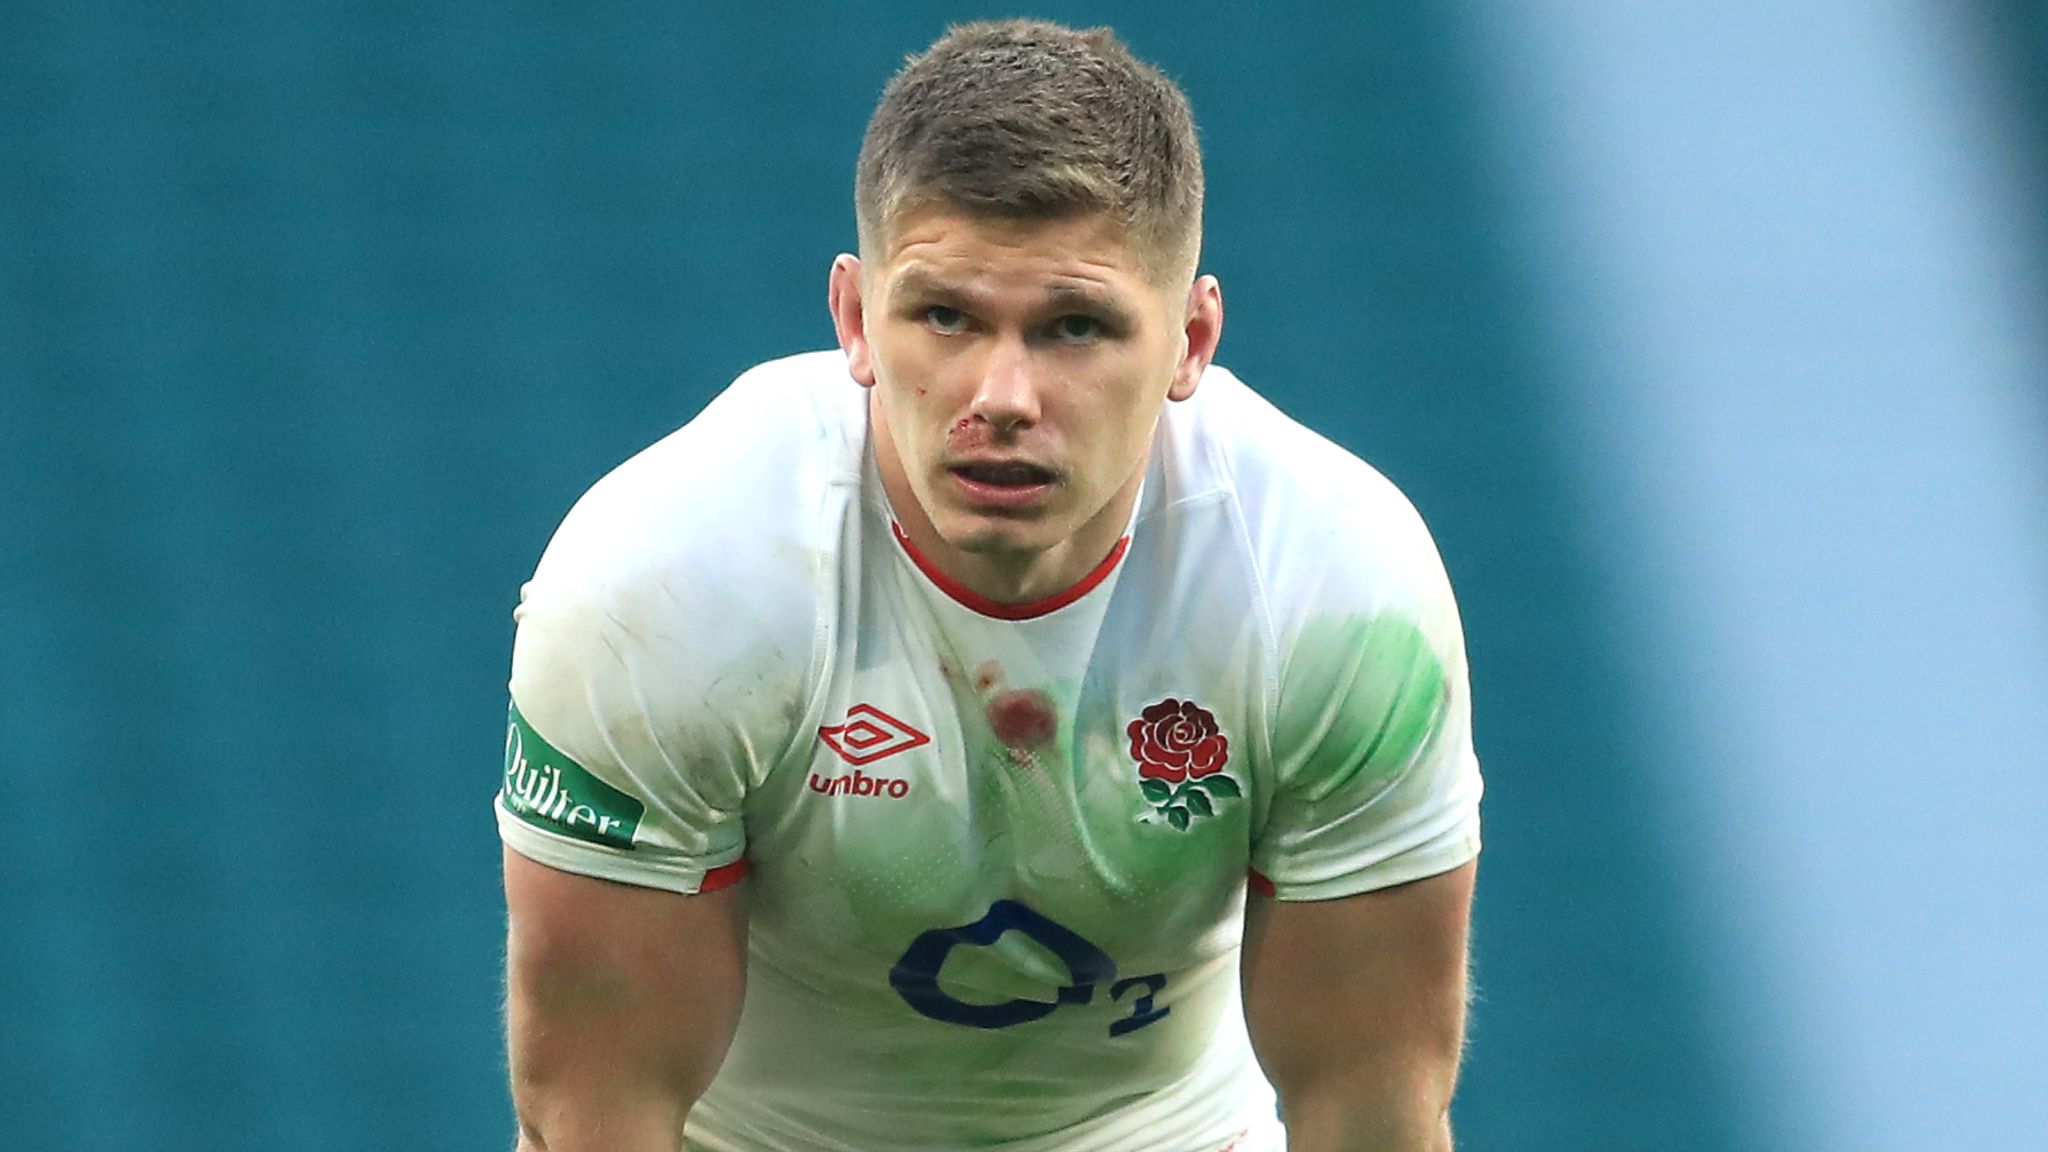 Six Nations: Eddie Jones says Owen Farrell's move to inside centre will 'spread out responsibility' for England against Italy. Rugby Union News